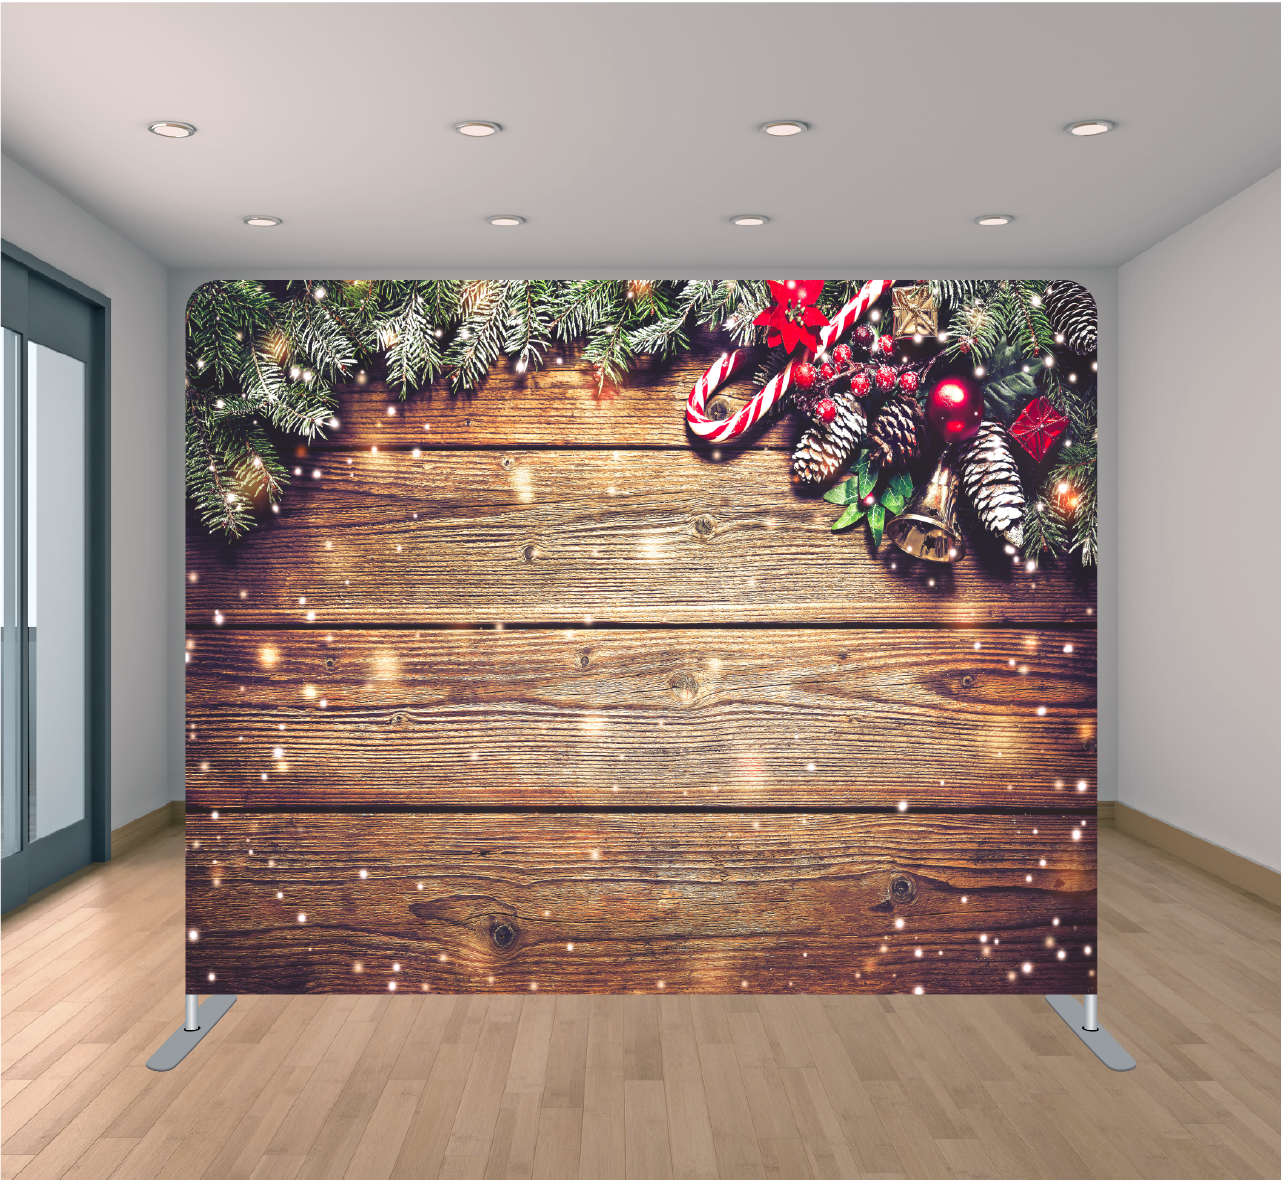 8x8ft Pillowcase Tension Backdrop- Wood w/ Ornaments (Holiday)